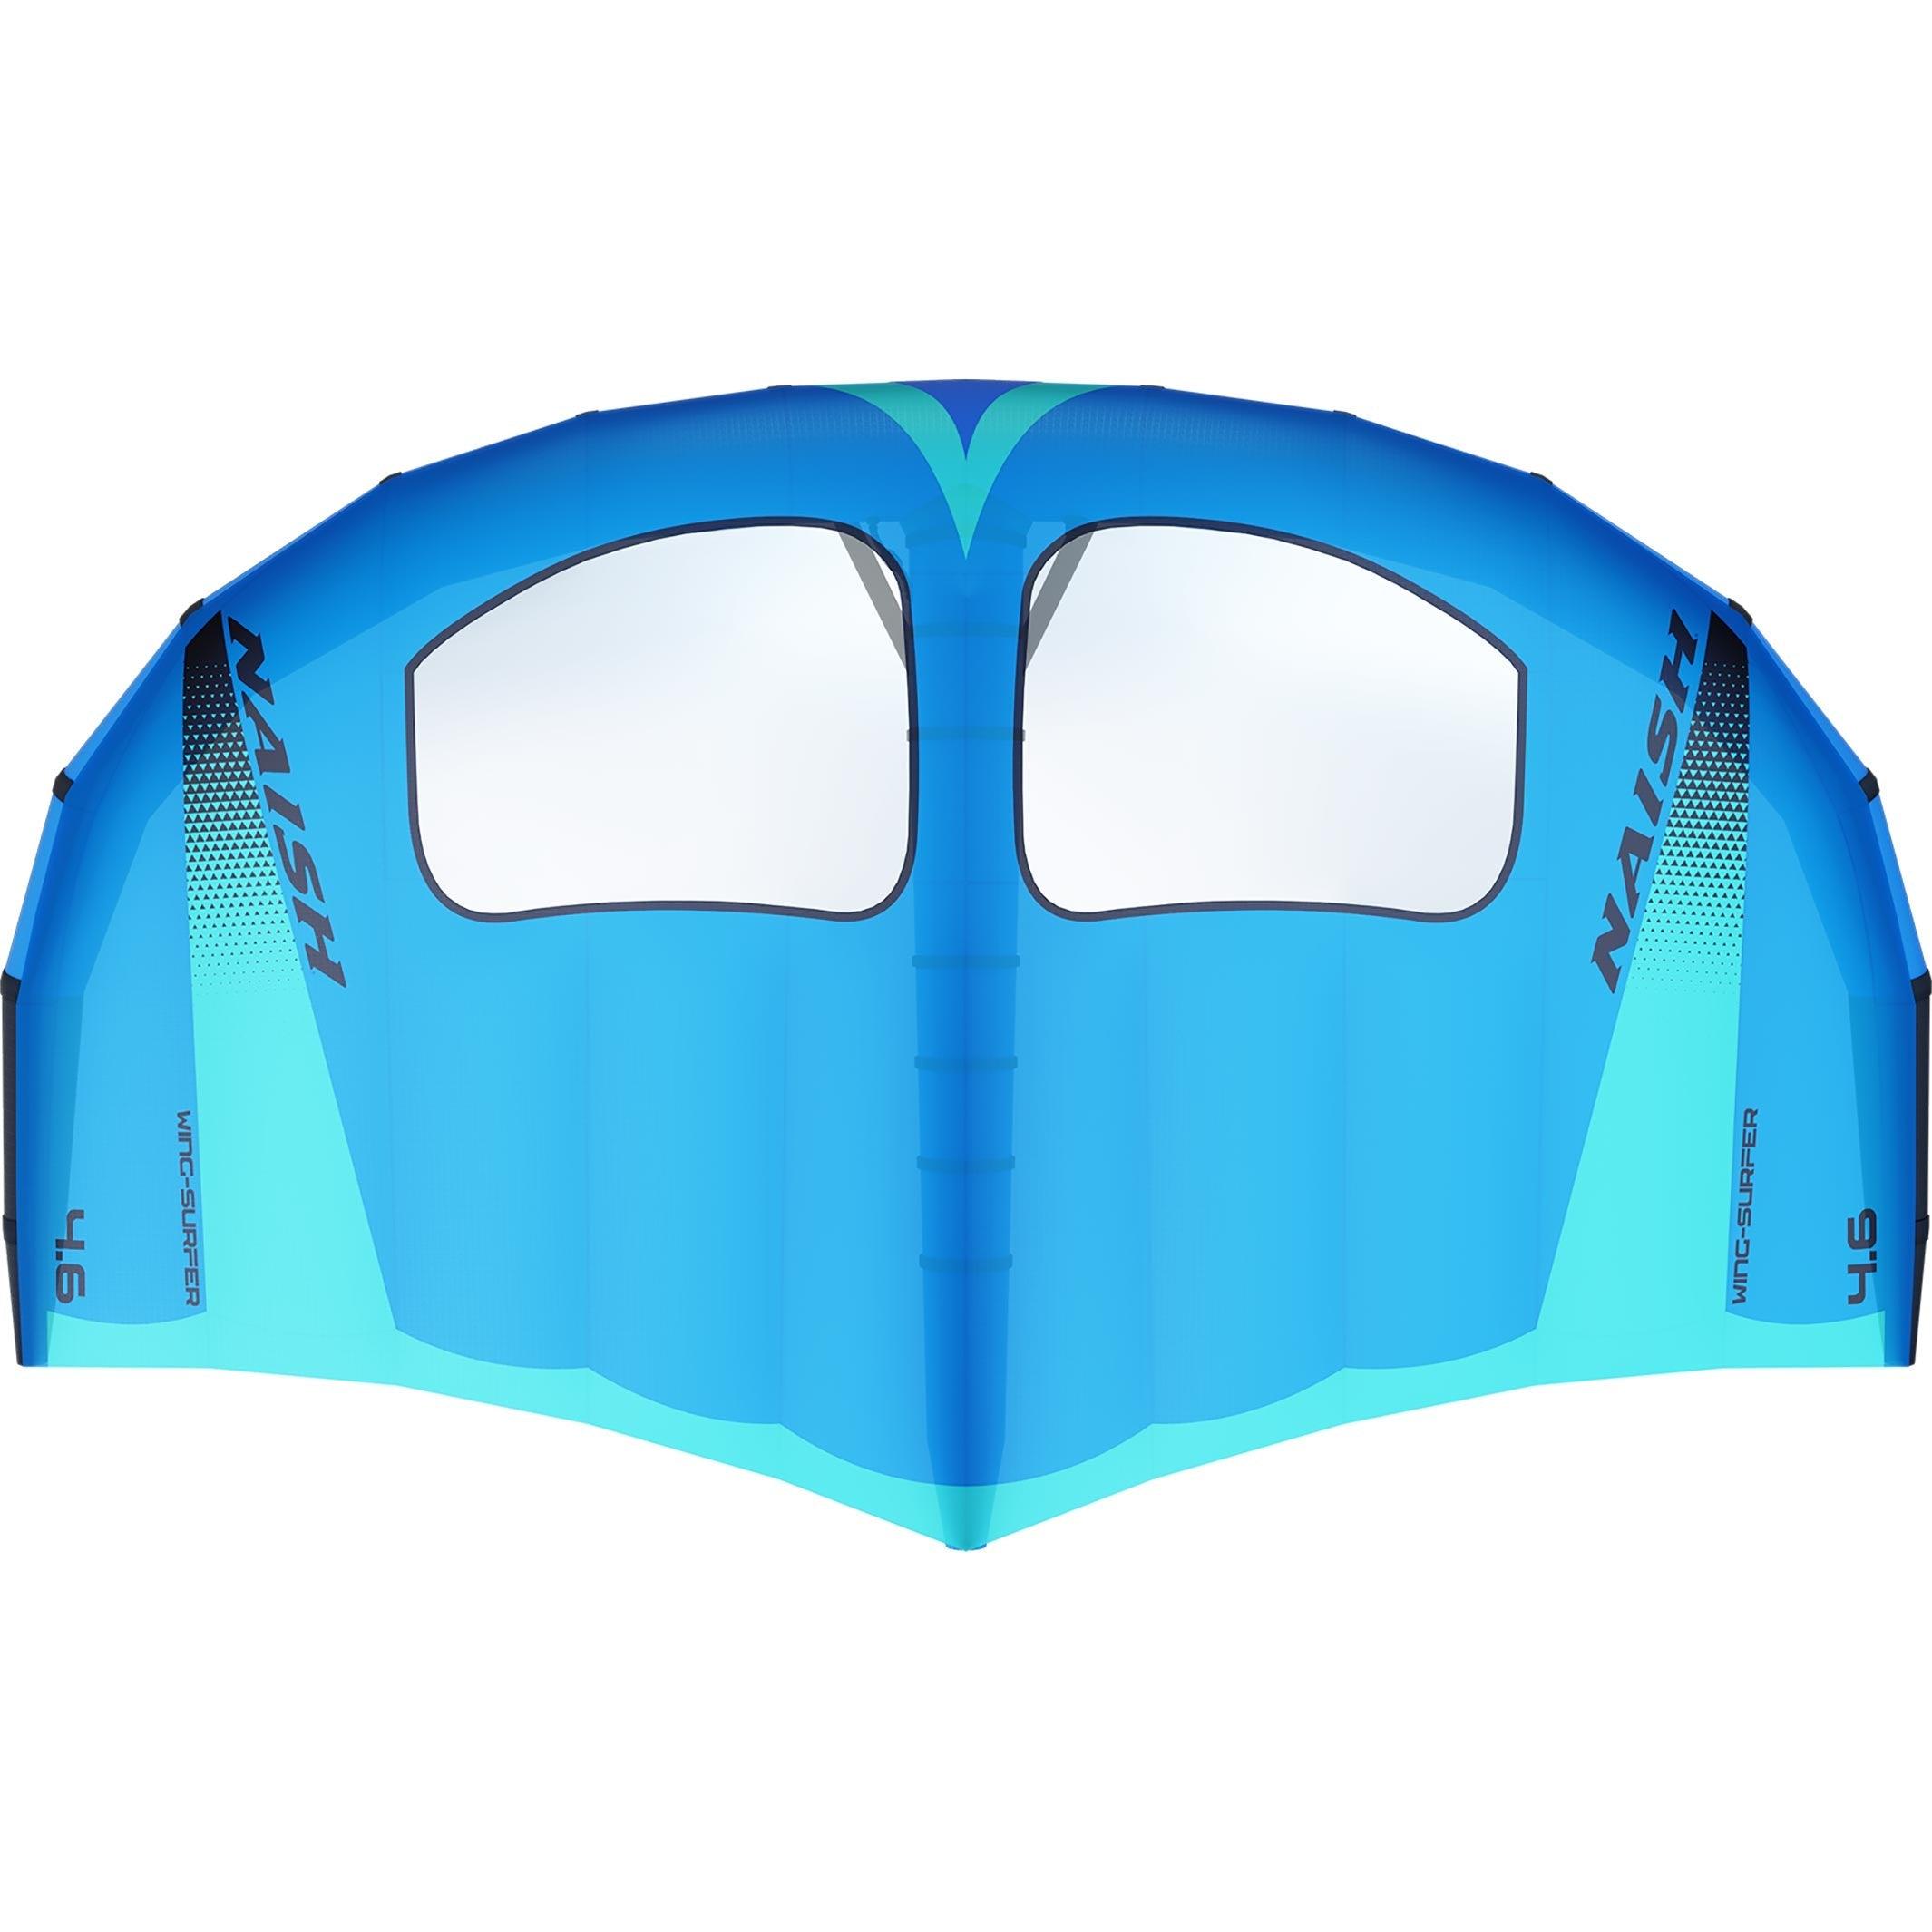 S26 Wing-Surfer